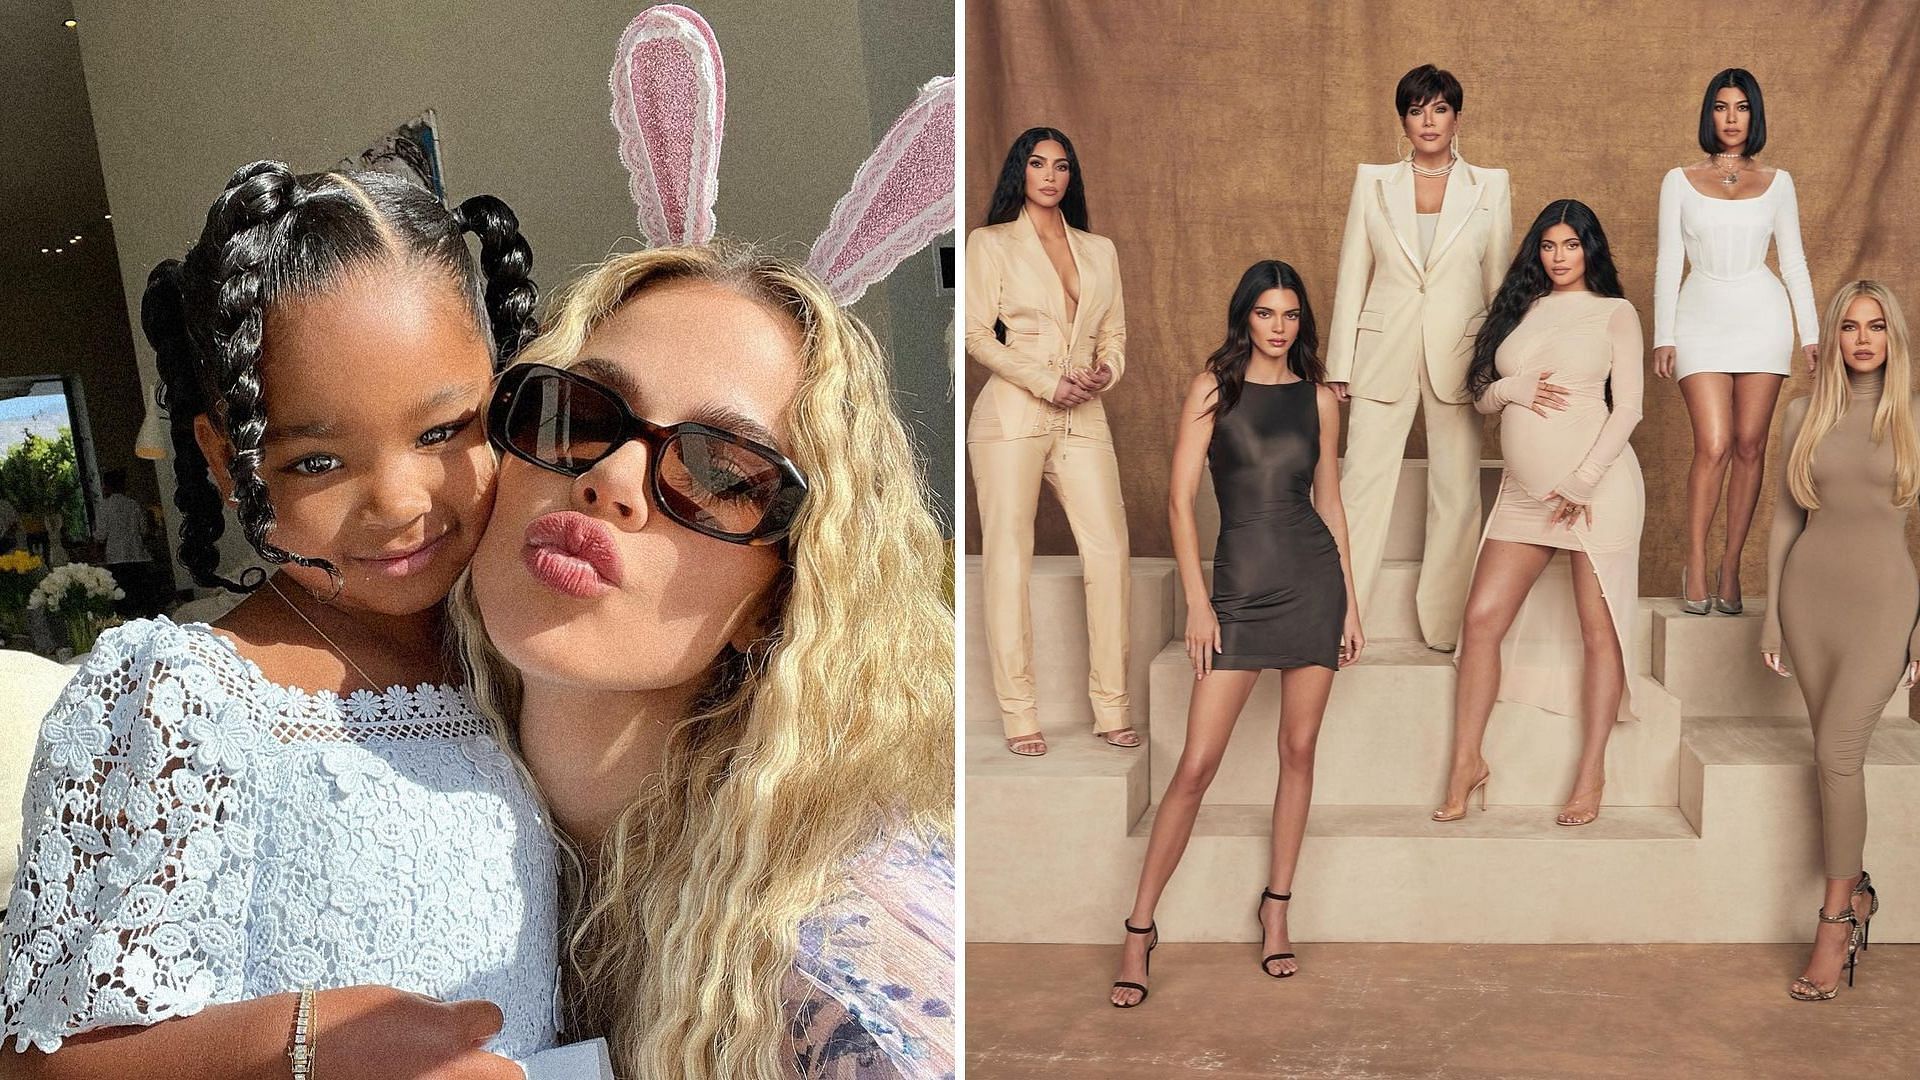 The Kardashians lived up to its name with an emotionally charged finale (Image via khloekardashian/Instagram)